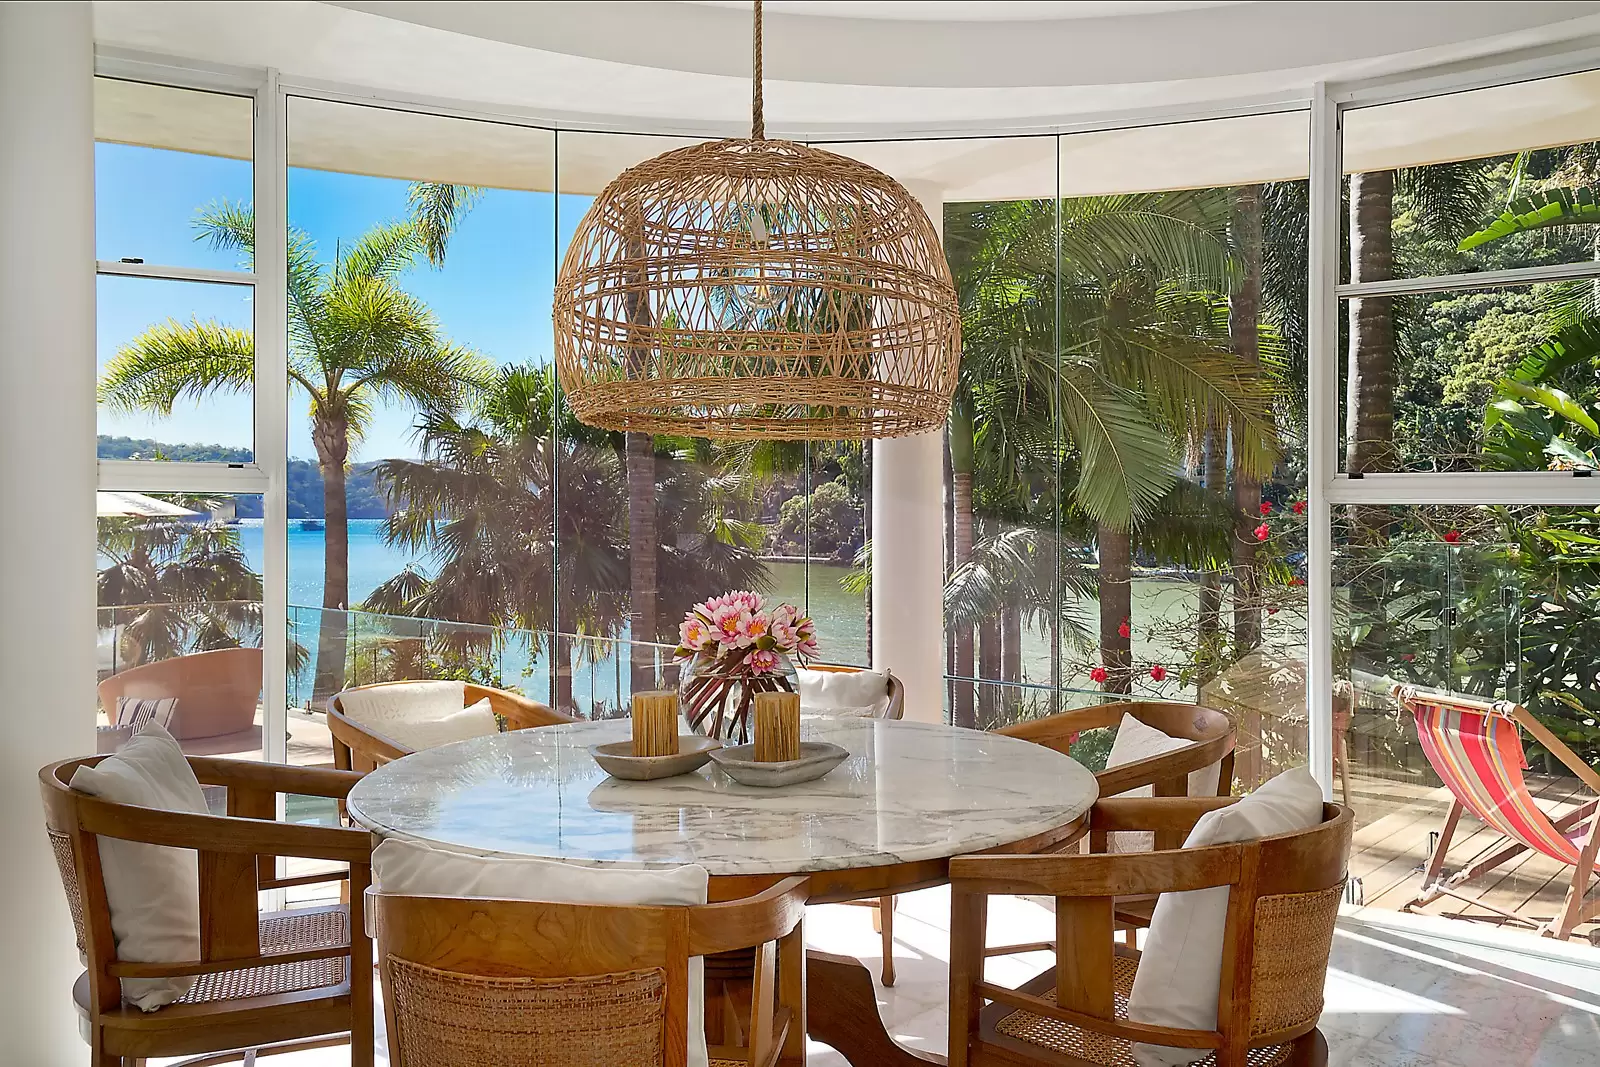 Photo #18: 25 Thyra Road, Palm Beach - Sold by Sydney Sotheby's International Realty